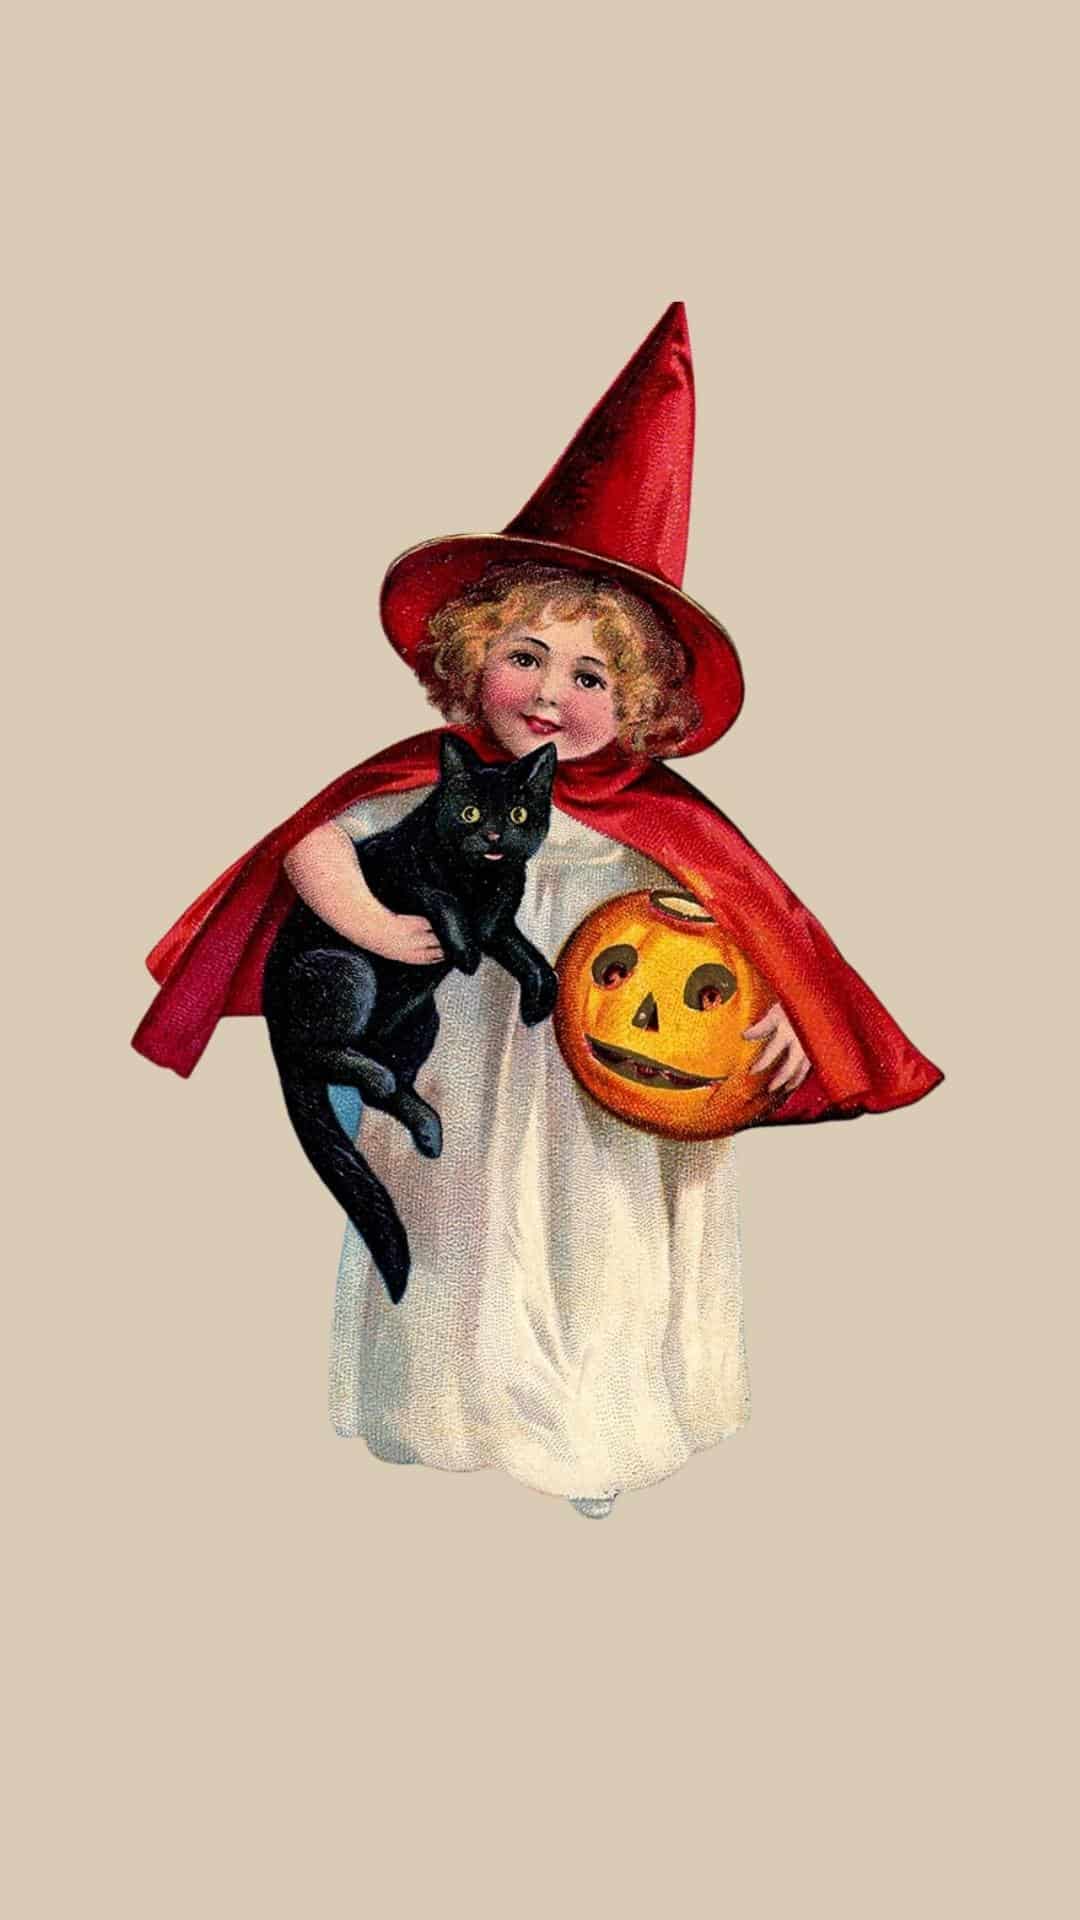 Cute witch and black cat image for your iPhone using a vintage Halloween postcard.